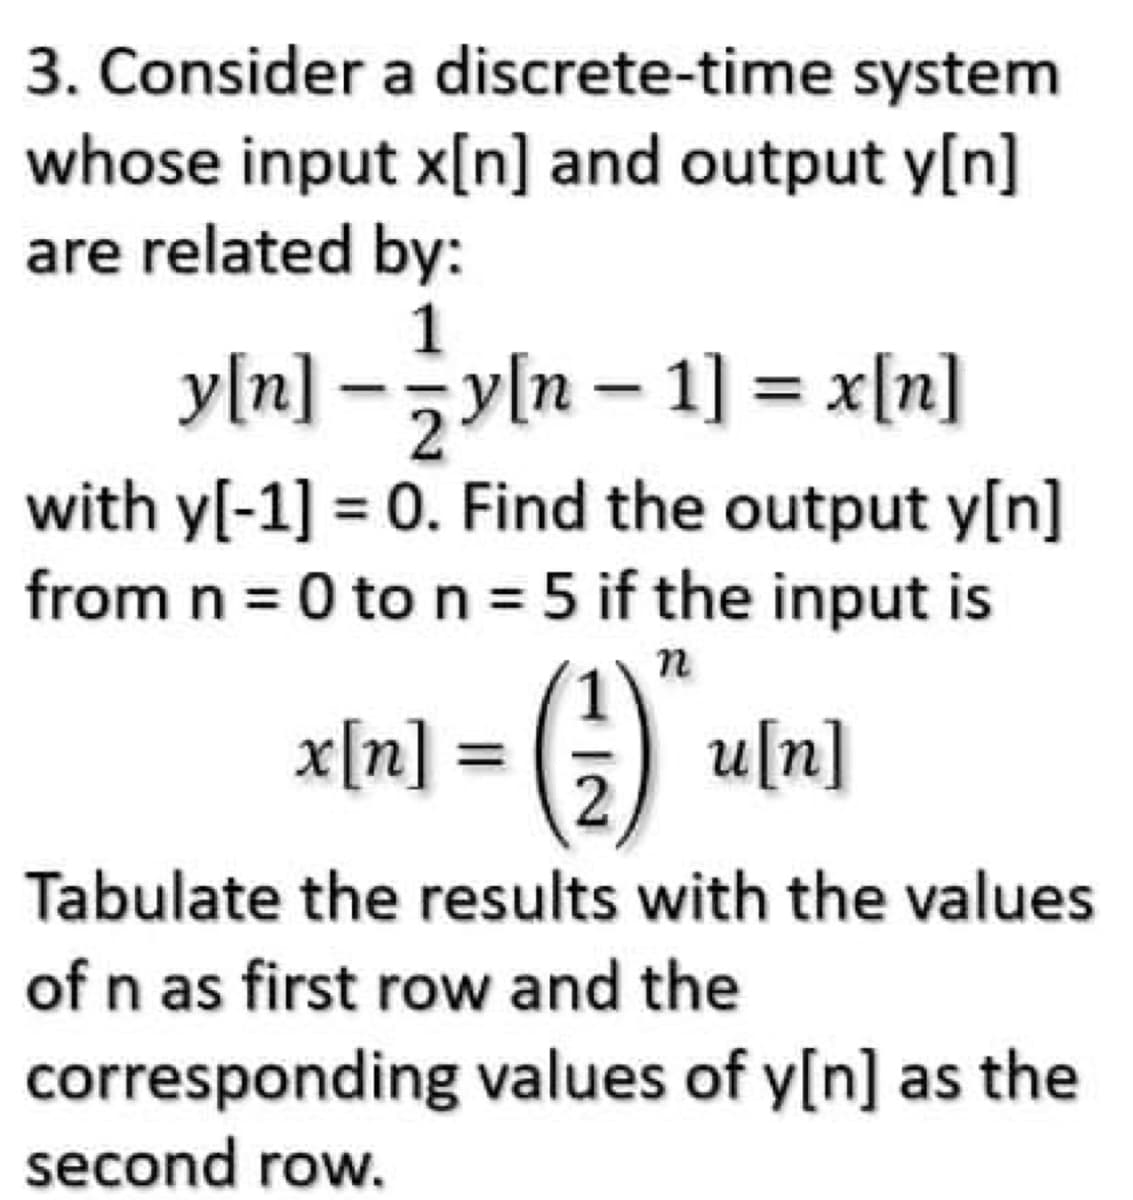 3. Consider a discrete-time system
whose input x[n] and output y[n]
are related by:
1
y[n] - zy[n - 1] = x[n]
with y[-1] = 0. Find the output y[n]
from n = 0 to n = 5 if the input is
n
x[n] = () a[n]
Tabulate the results with the values
of n as first row and the
corresponding values of y[n] as the
second row.